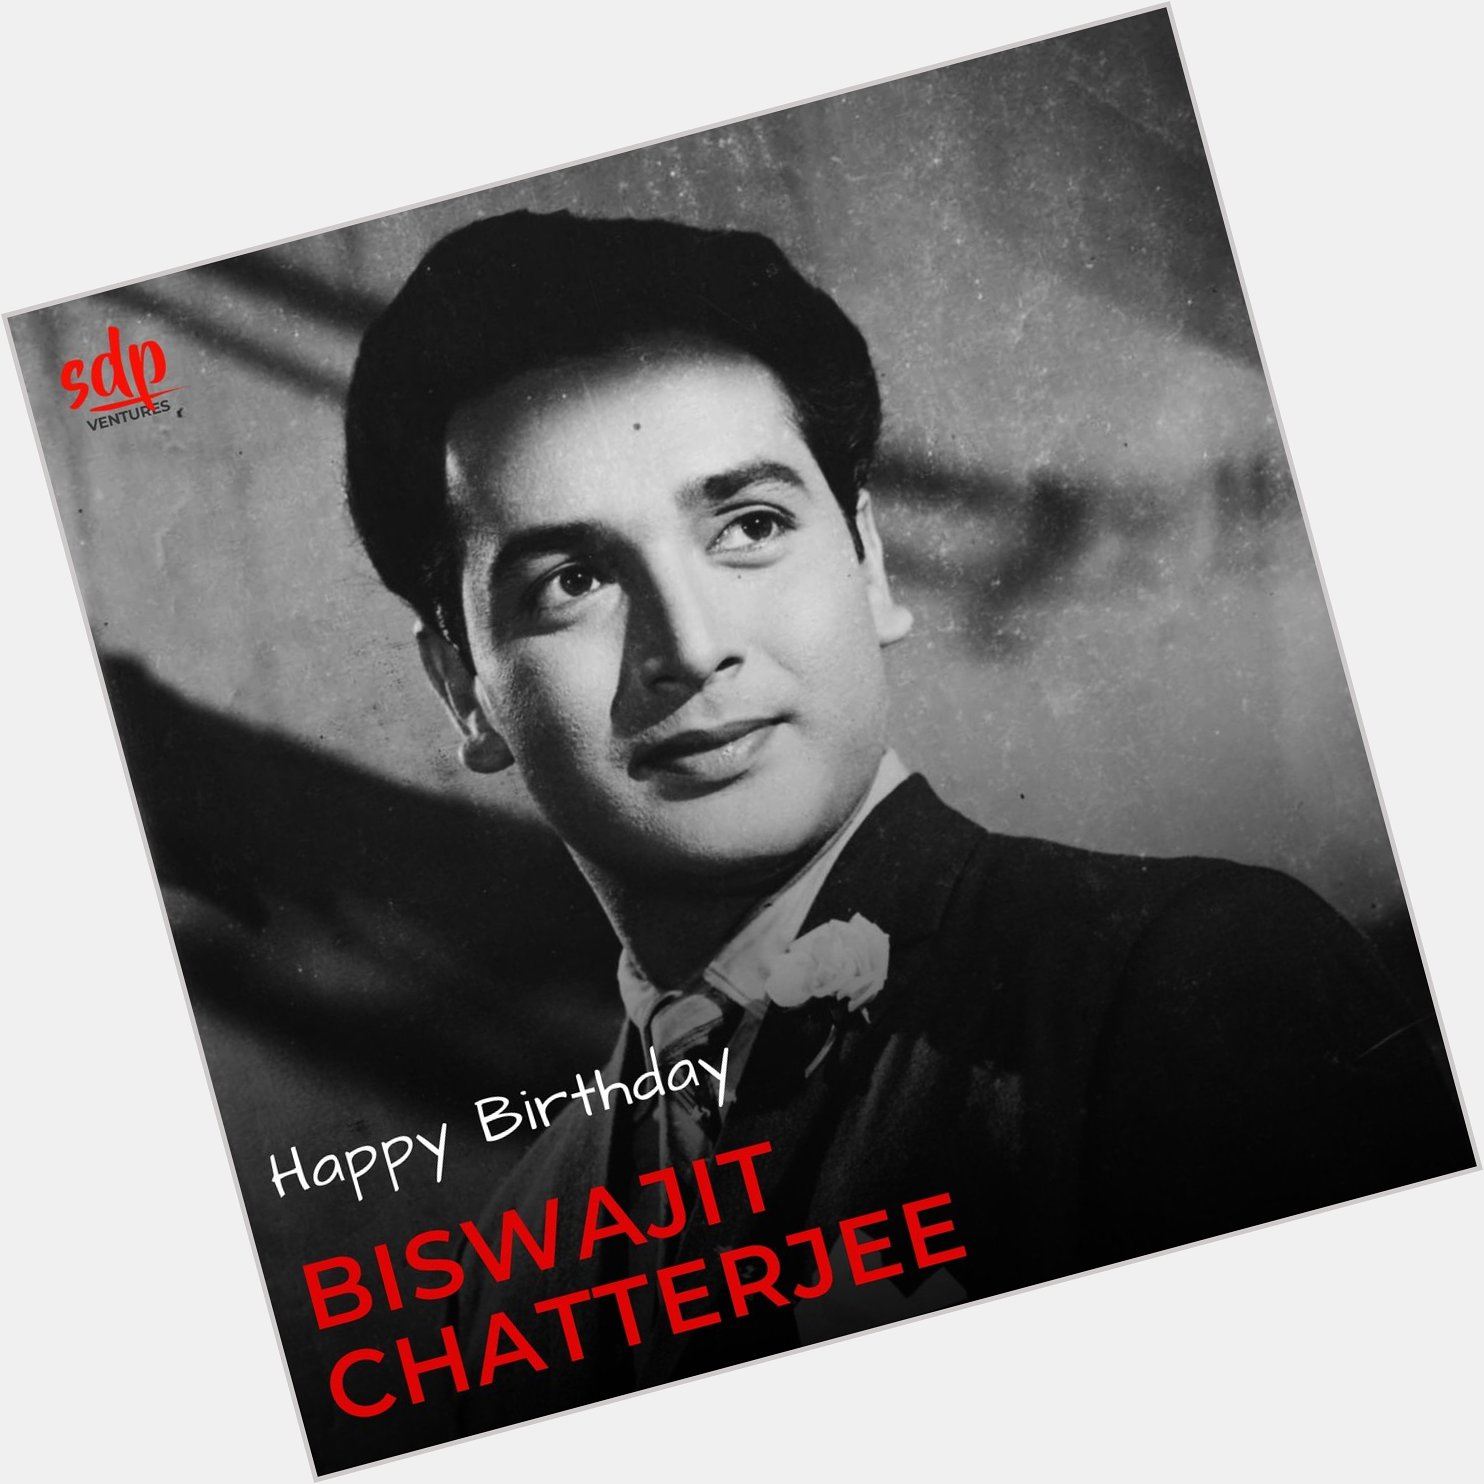 Wishing a very happy birthday to the legendary actor,  Biswajit Chatterjee 